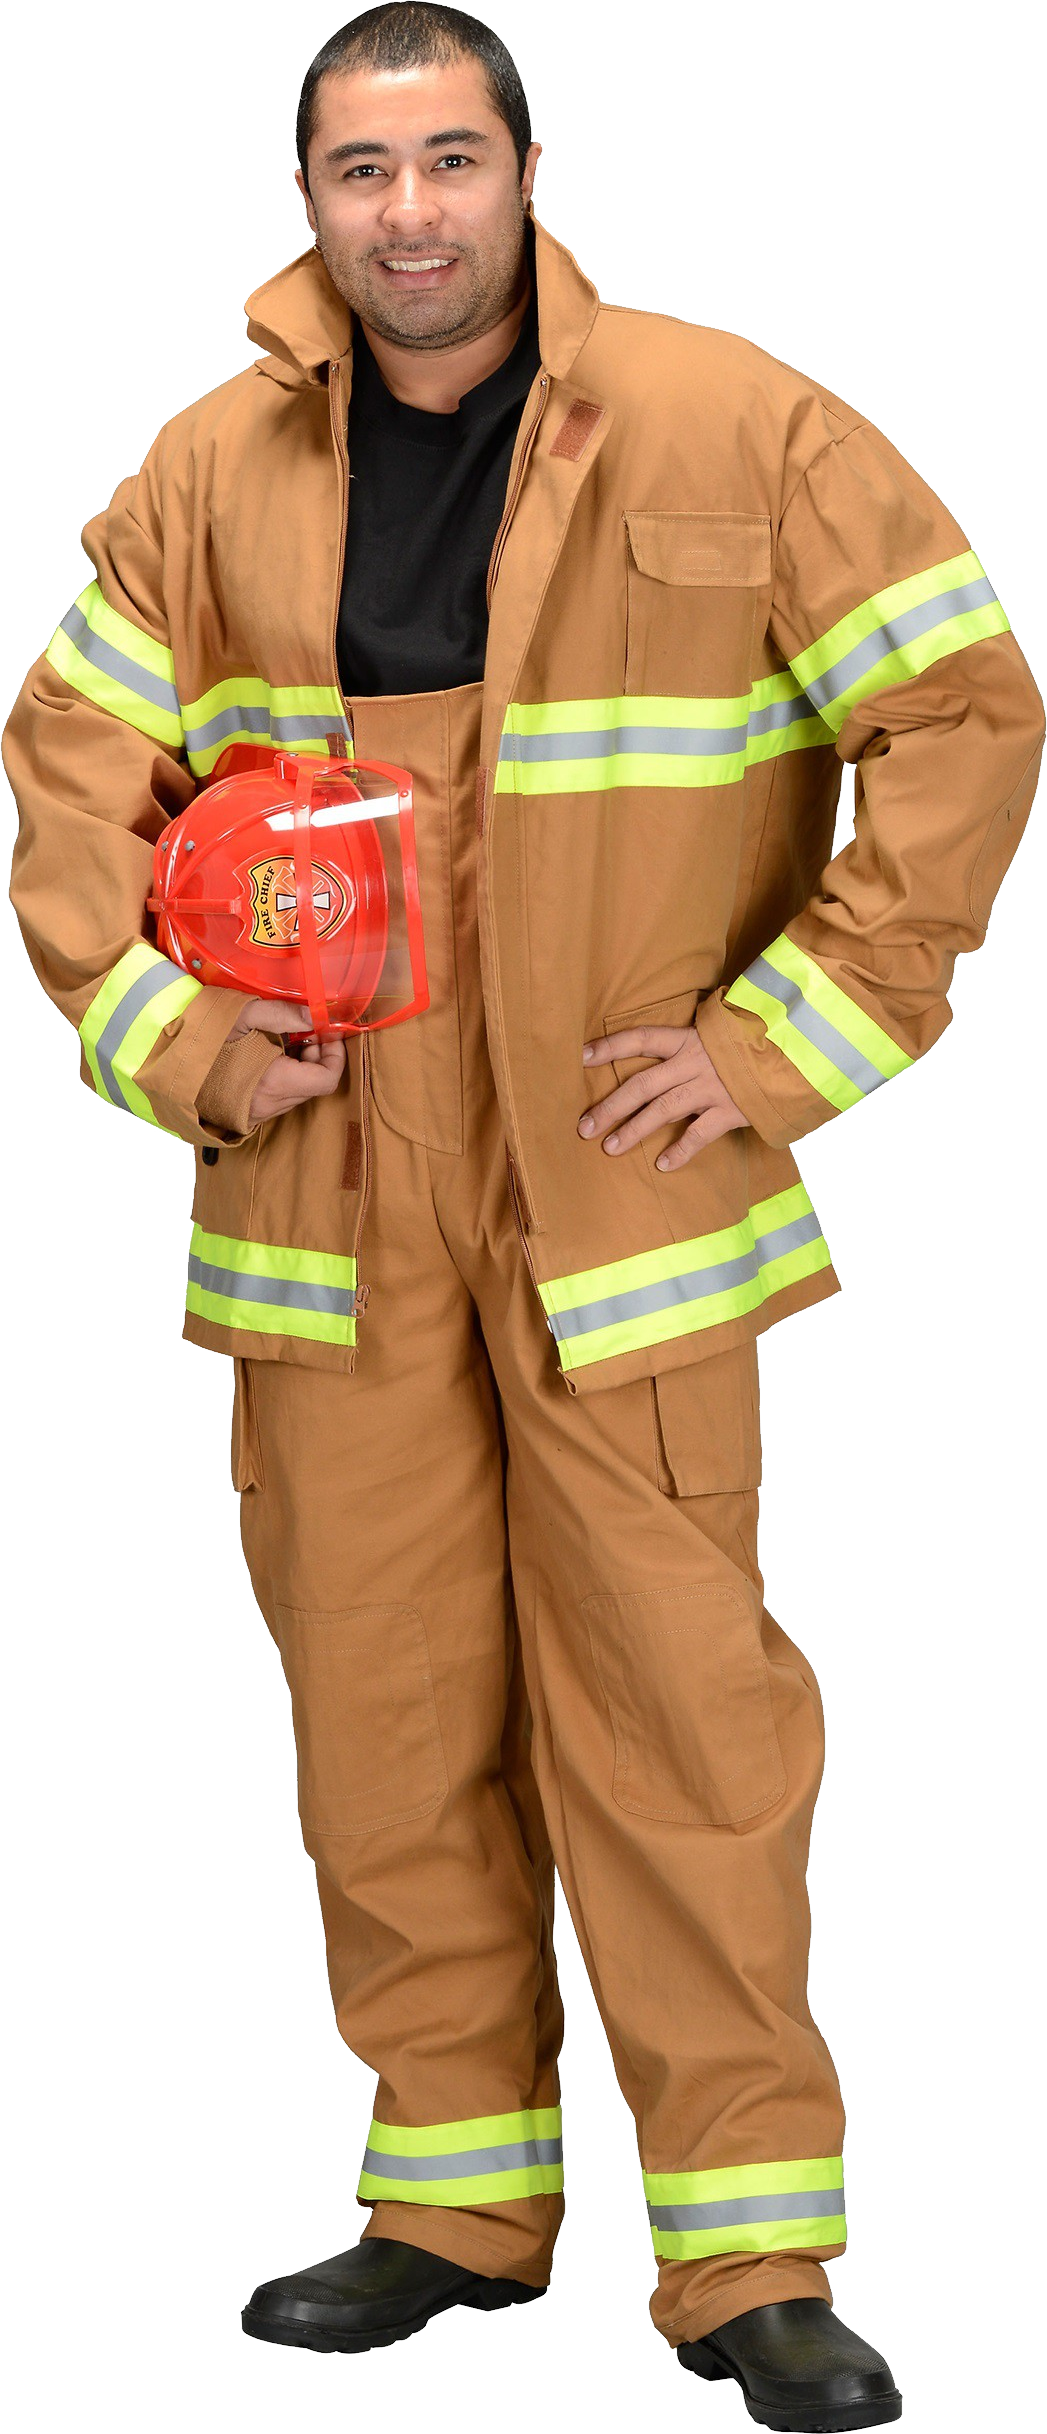 Firefighter - Adult Firefighter Costume (1047x2434)